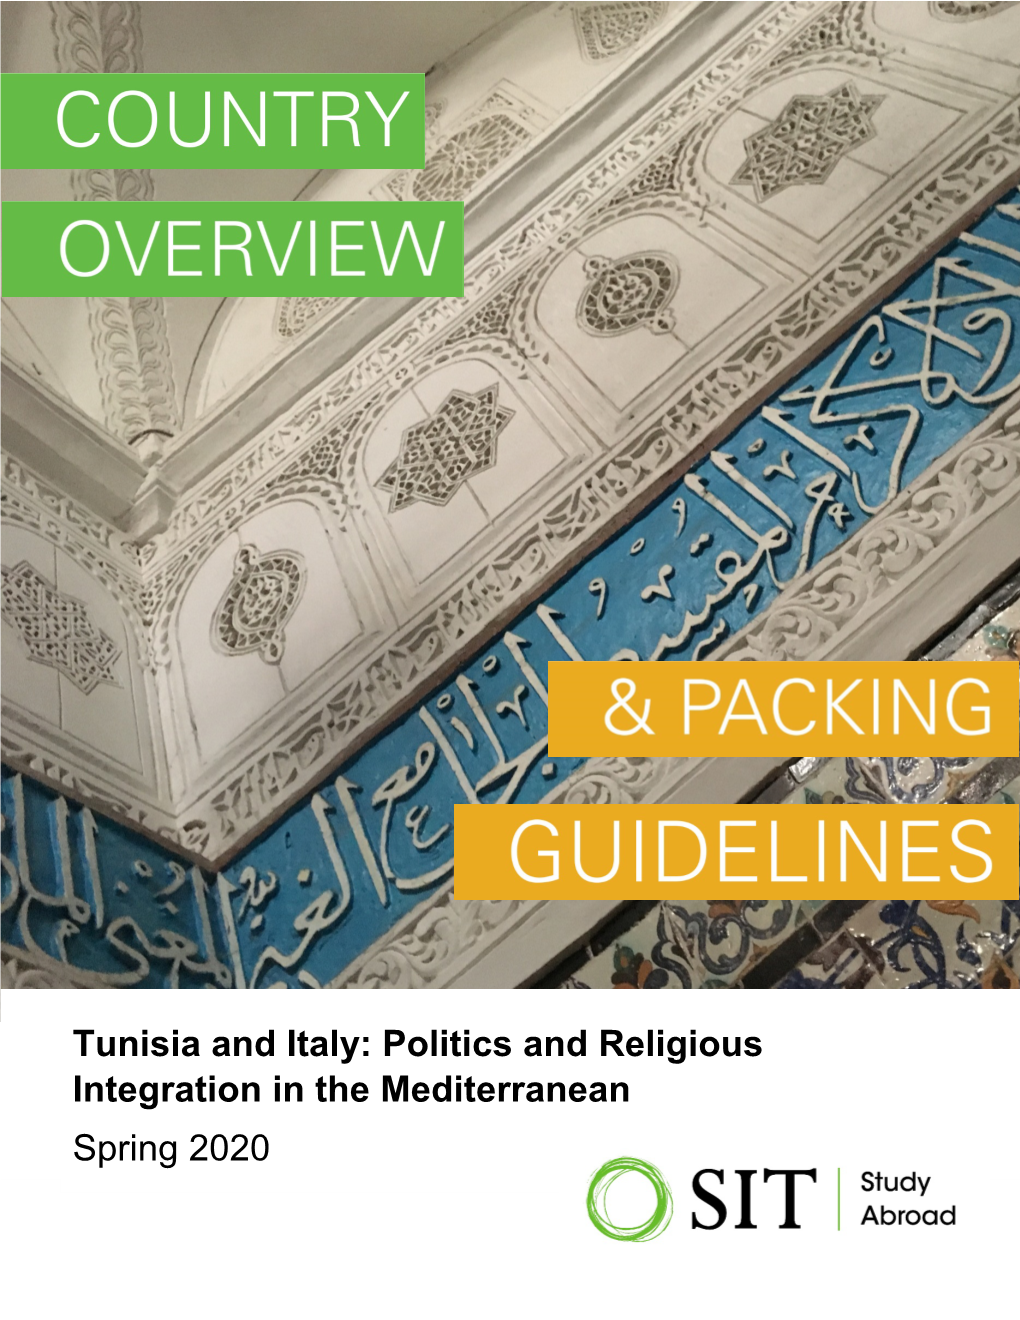 Tunisia and Italy: Politics and Religious Integration in the Mediterranean Spring 2020